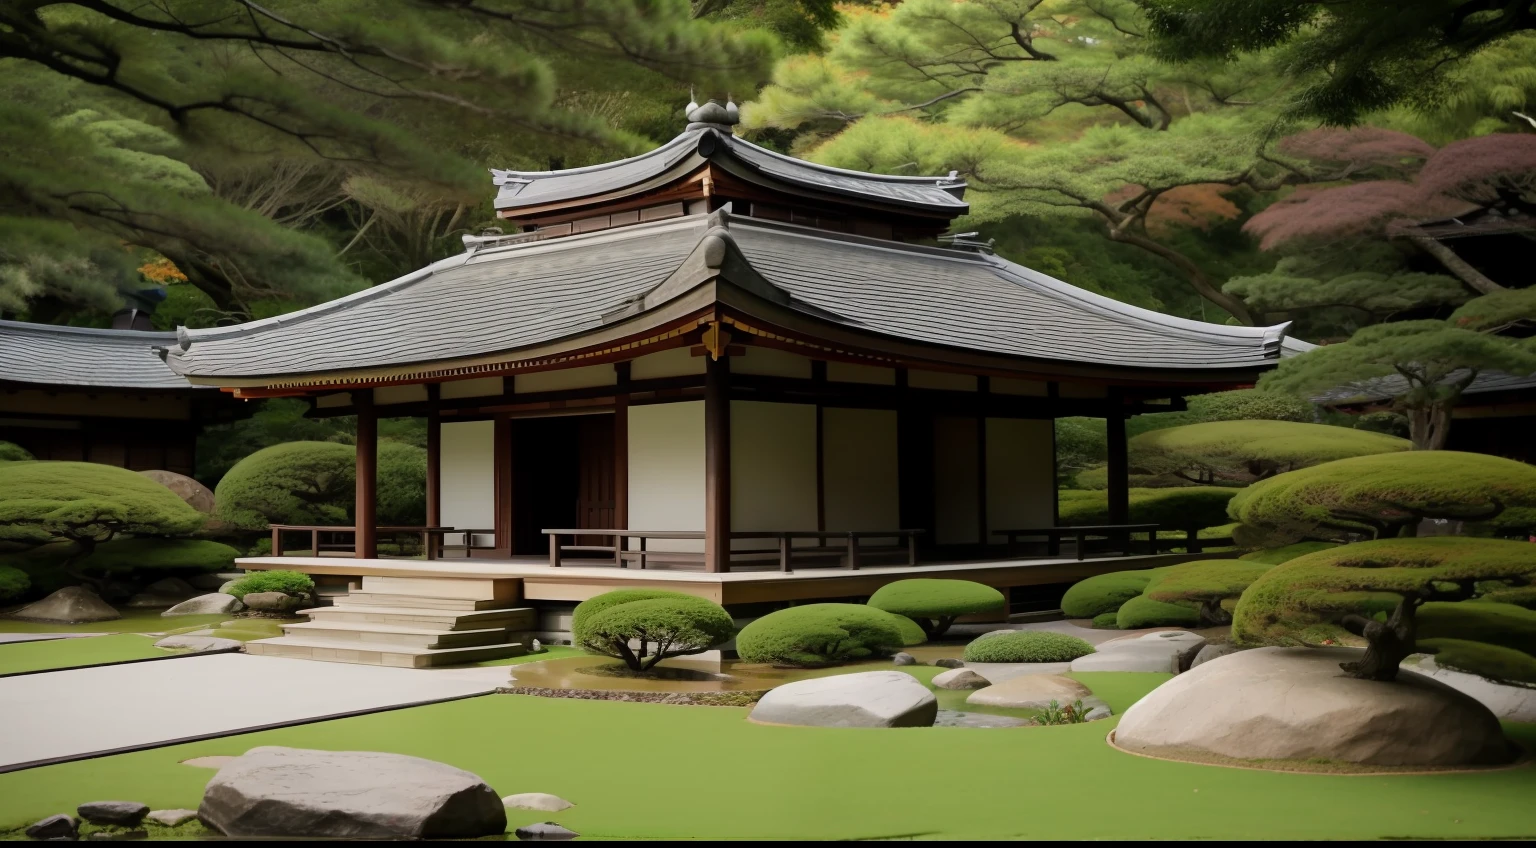 There are rocks and trees，There is also a gazebo, Zen garden, Japanese Garden, lush japanese landscape, wonderful masterpiece, Beautiful masterpiece, in japanese garden, Zen temple background, Japanese style houses, inspired by Itō Jakuchū, Ancient Japanese architecture, Japanese style, Beautiful symmetry, japanese temples, Japanese architecture, Beautiful garden, beautiful aesthetic，Realiy，4K